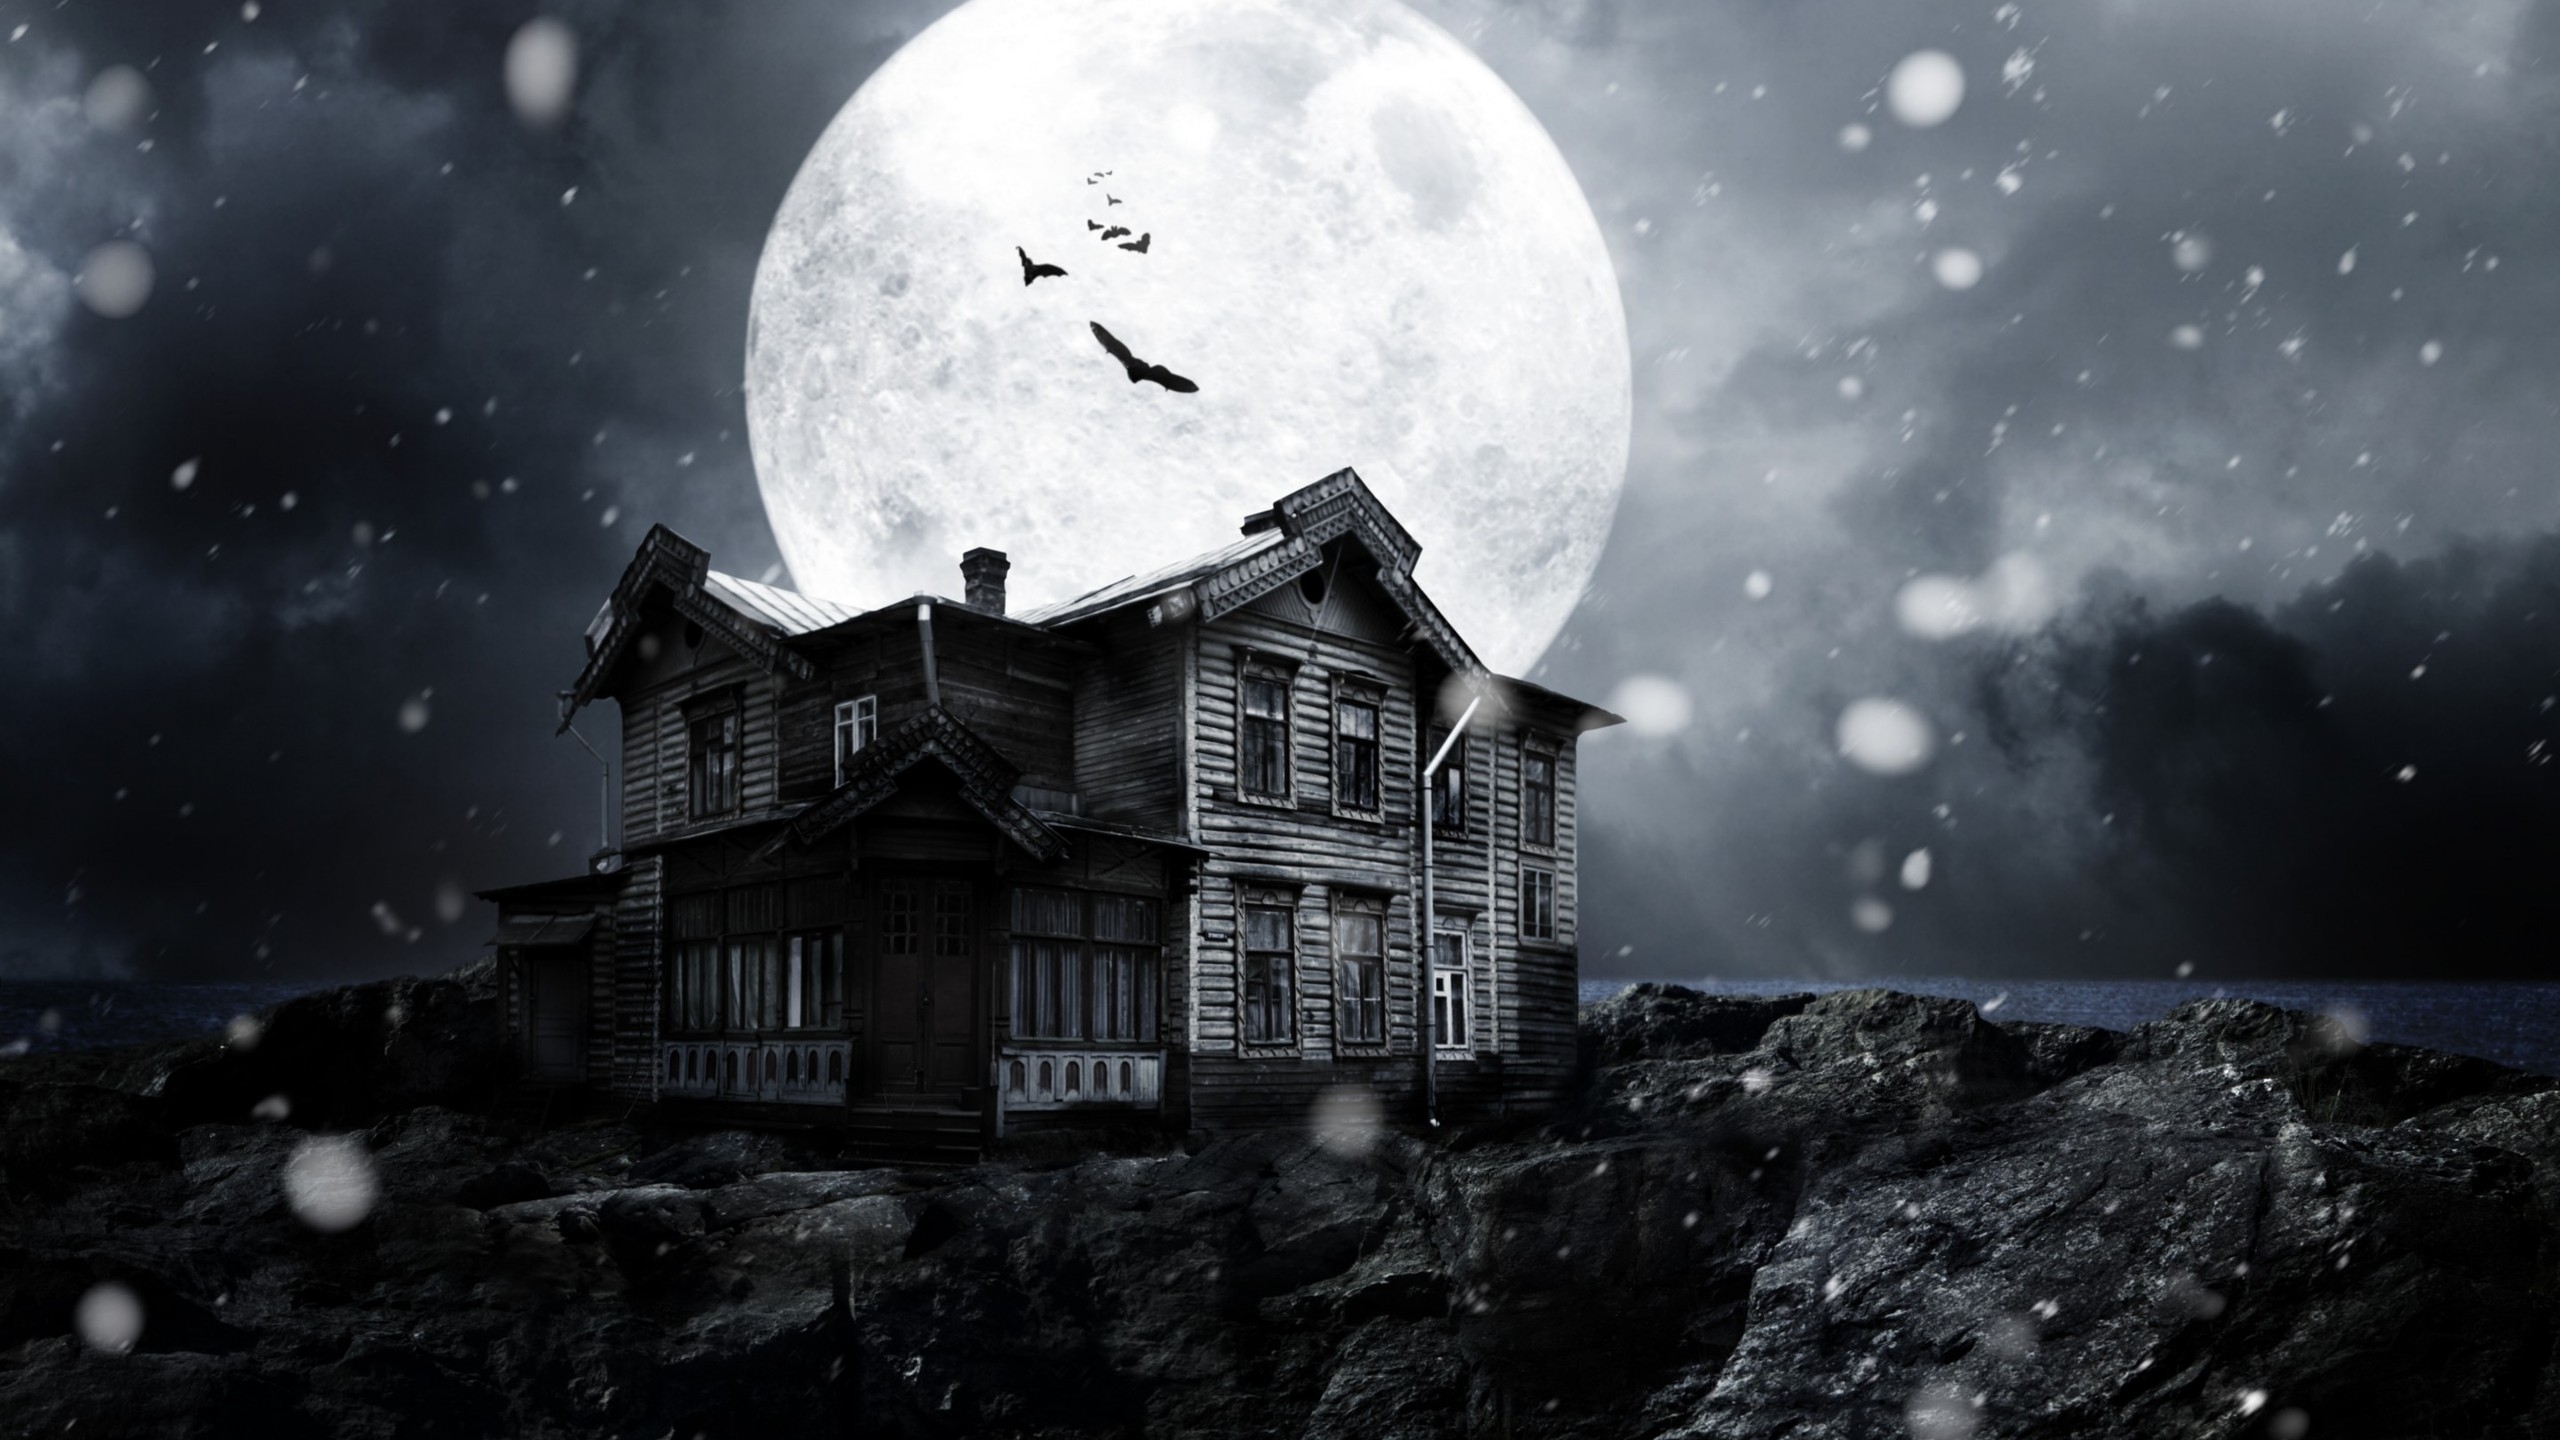 A Haunted House Movie for 2560x1440 HDTV resolution